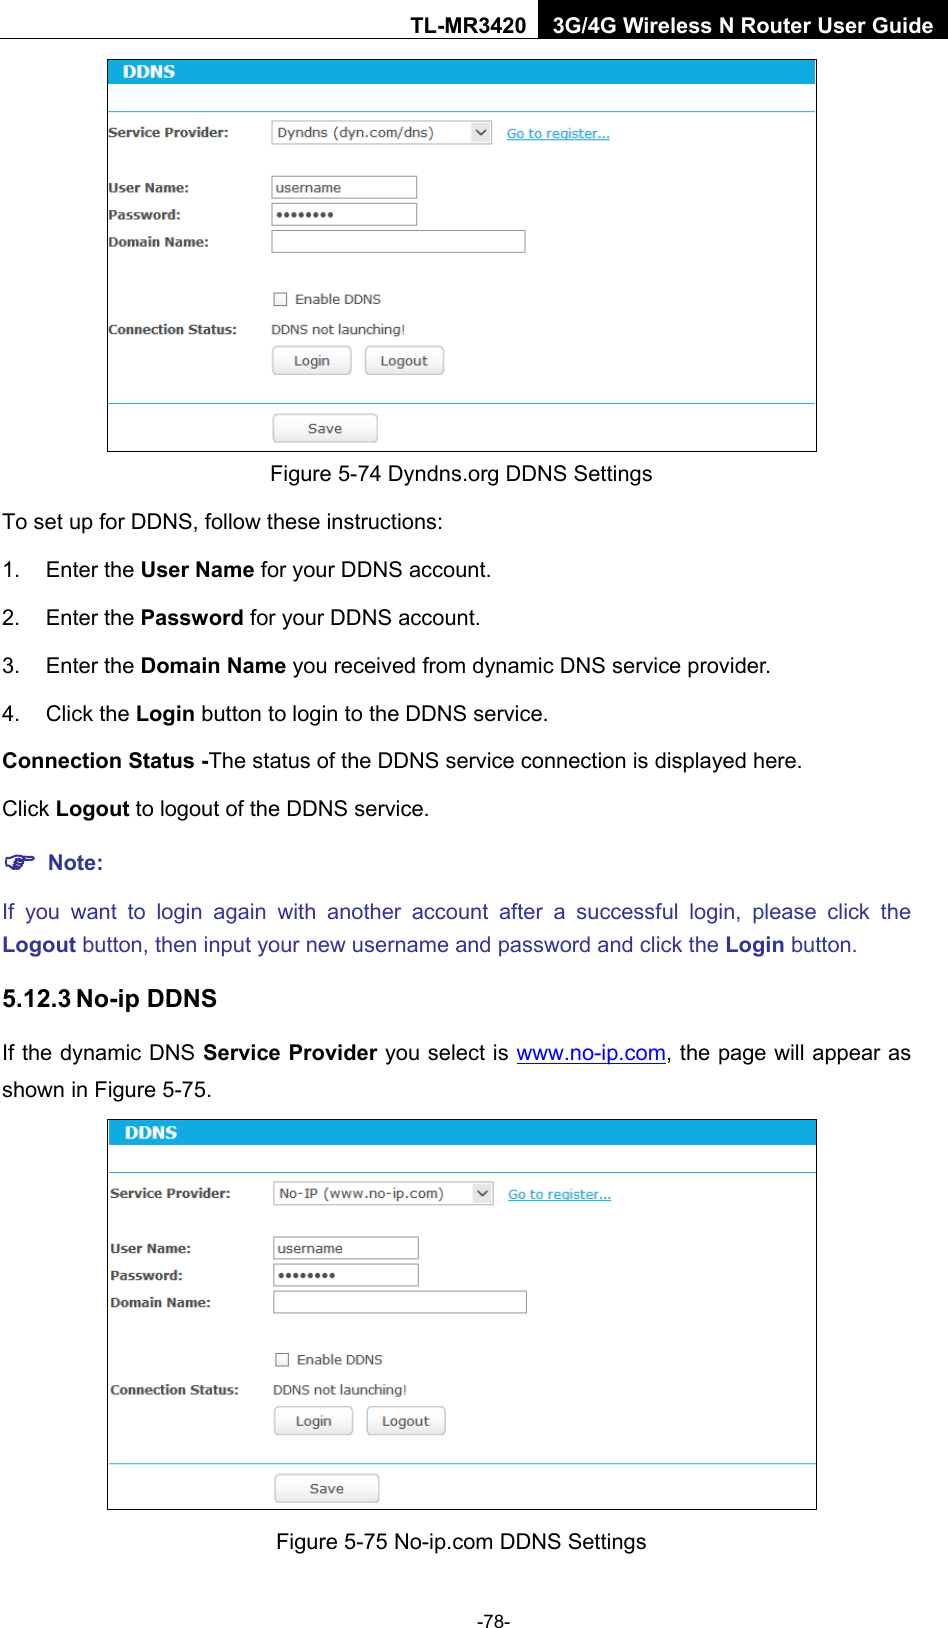    -78- TL-MR3420 3G/4G Wireless N Router User Guide  Figure 5-74 Dyndns.org DDNS Settings To set up for DDNS, follow these instructions: 1. Enter the User Name for your DDNS account.   2. Enter the Password for your DDNS account.   3. Enter the Domain Name you received from dynamic DNS service provider.   4. Click the Login button to login to the DDNS service.   Connection Status -The status of the DDNS service connection is displayed here. Click Logout to logout of the DDNS service.    Note: If you want to login again with another account after a successful login, please click the Logout button, then input your new username and password and click the Login button. 5.12.3 No-ip DDNS If the dynamic DNS Service Provider you select is www.no-ip.com, the page will appear as shown in Figure 5-75.  Figure 5-75 No-ip.com DDNS Settings 